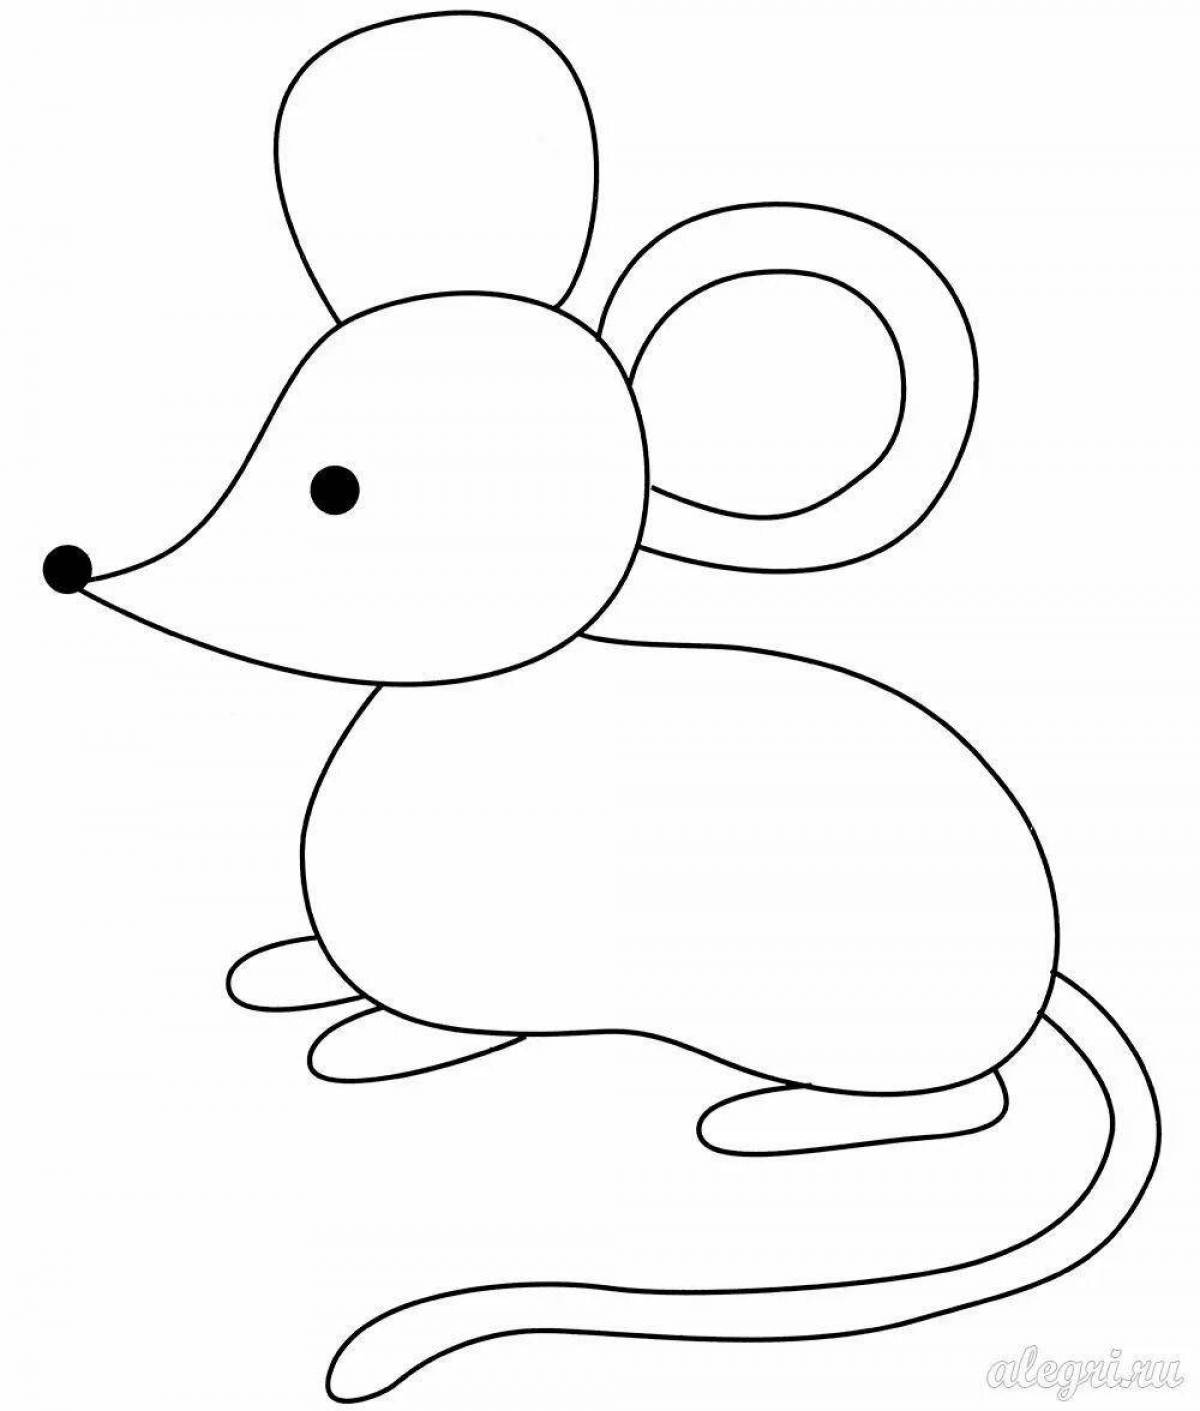 X-traordinary coloring mouse for children 2-3 years old